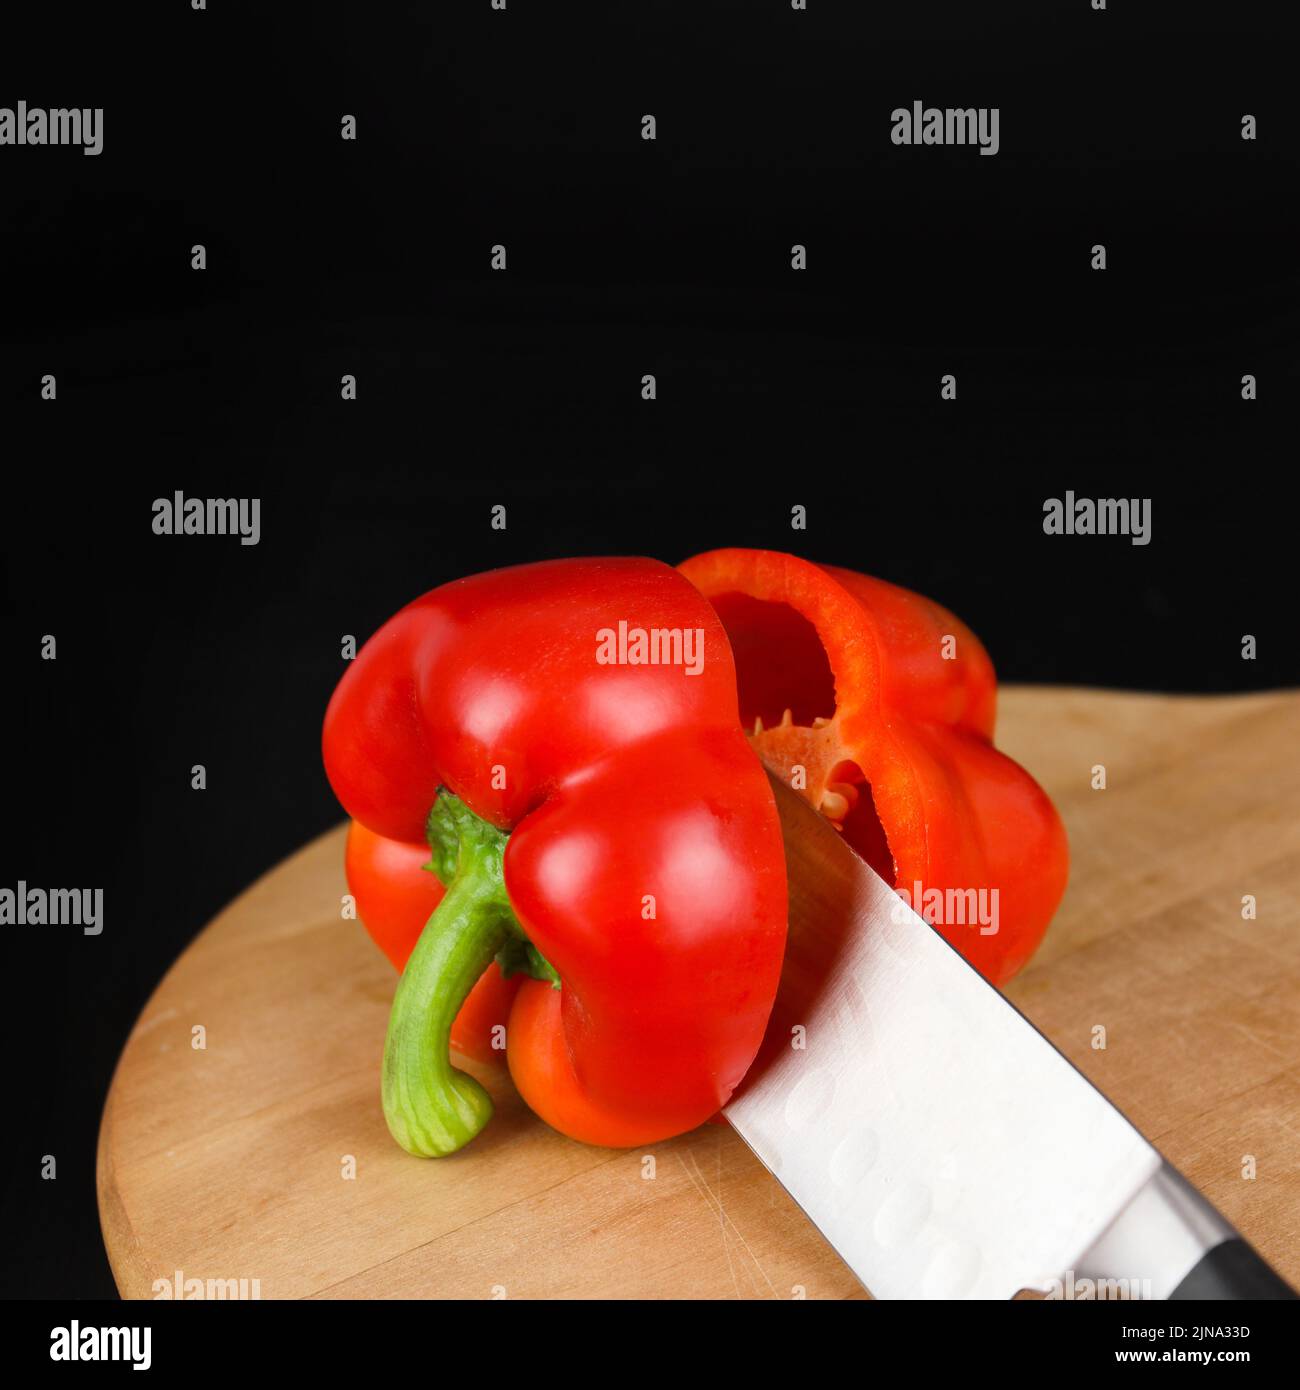 Knife cut the red pepper in kitchen on wooden board Stock Photo